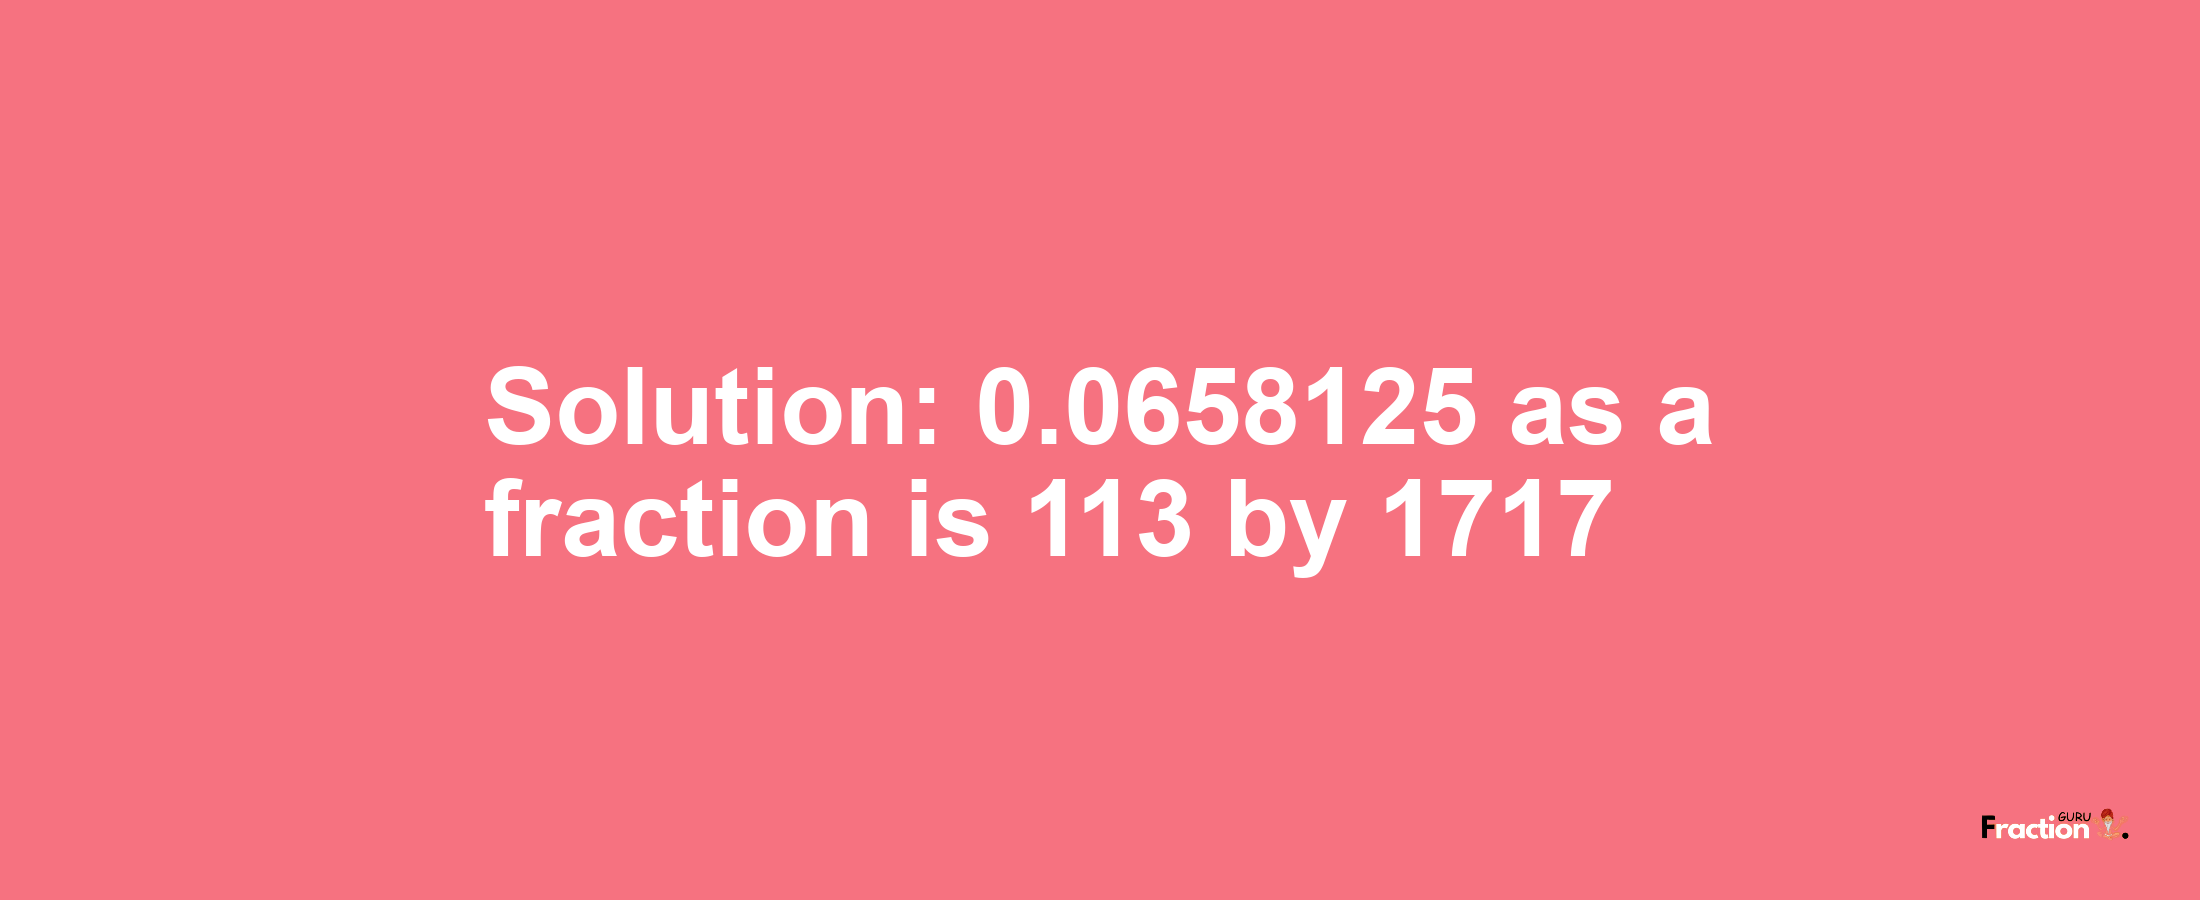 Solution:0.0658125 as a fraction is 113/1717